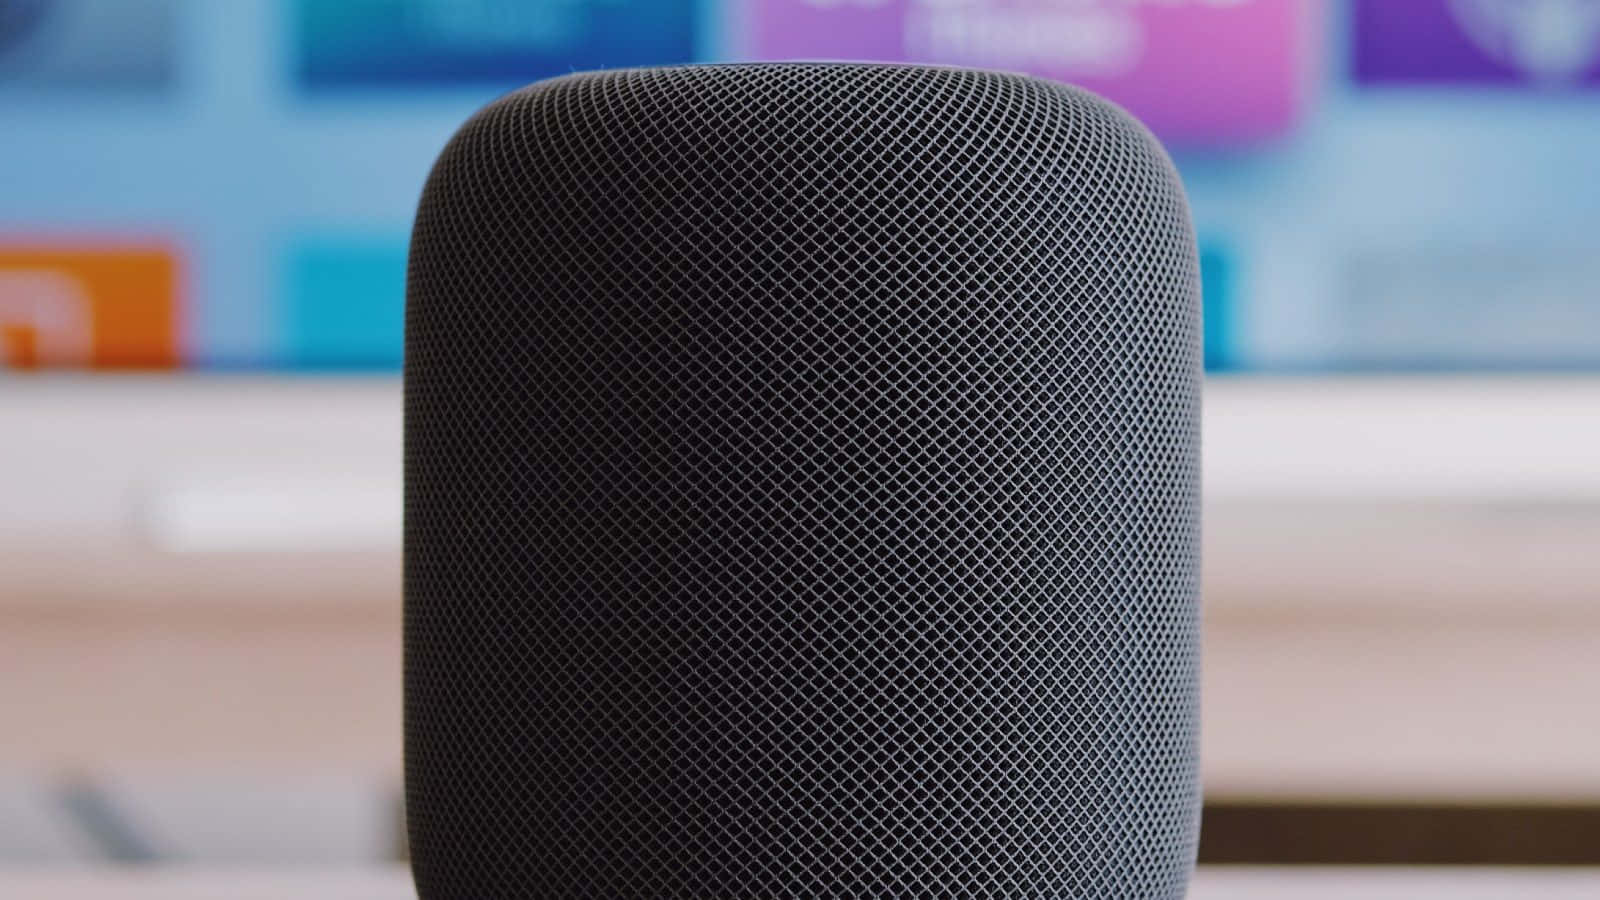 Caption: Apple Homepod On A Wooden Table Wallpaper